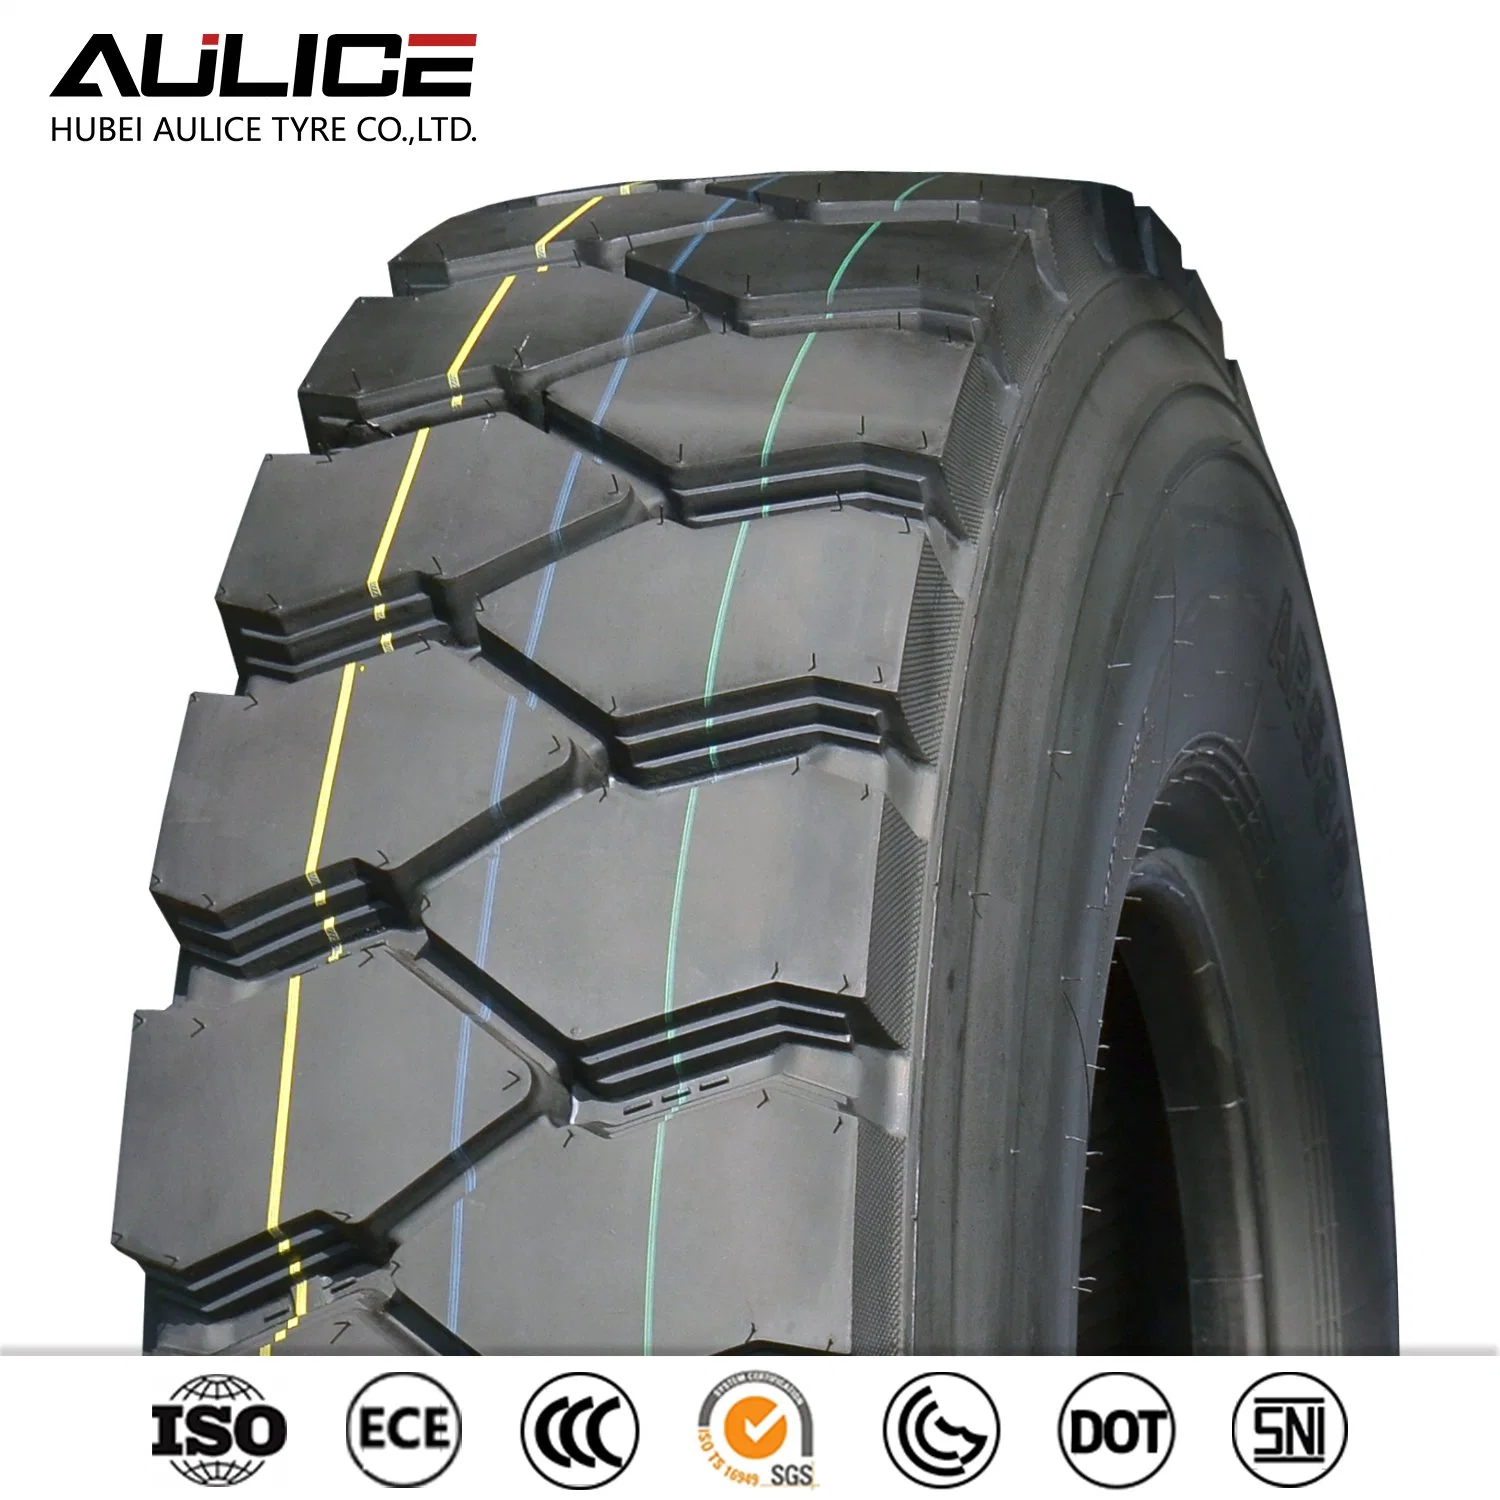 11.00R20 Aulice All Steel Radial TBR/OTR/TBB/BIAS Heavy Duty Truck Tyres for Mining Area with Gcc, SNI, DOT Certificates from tyre manufacturer